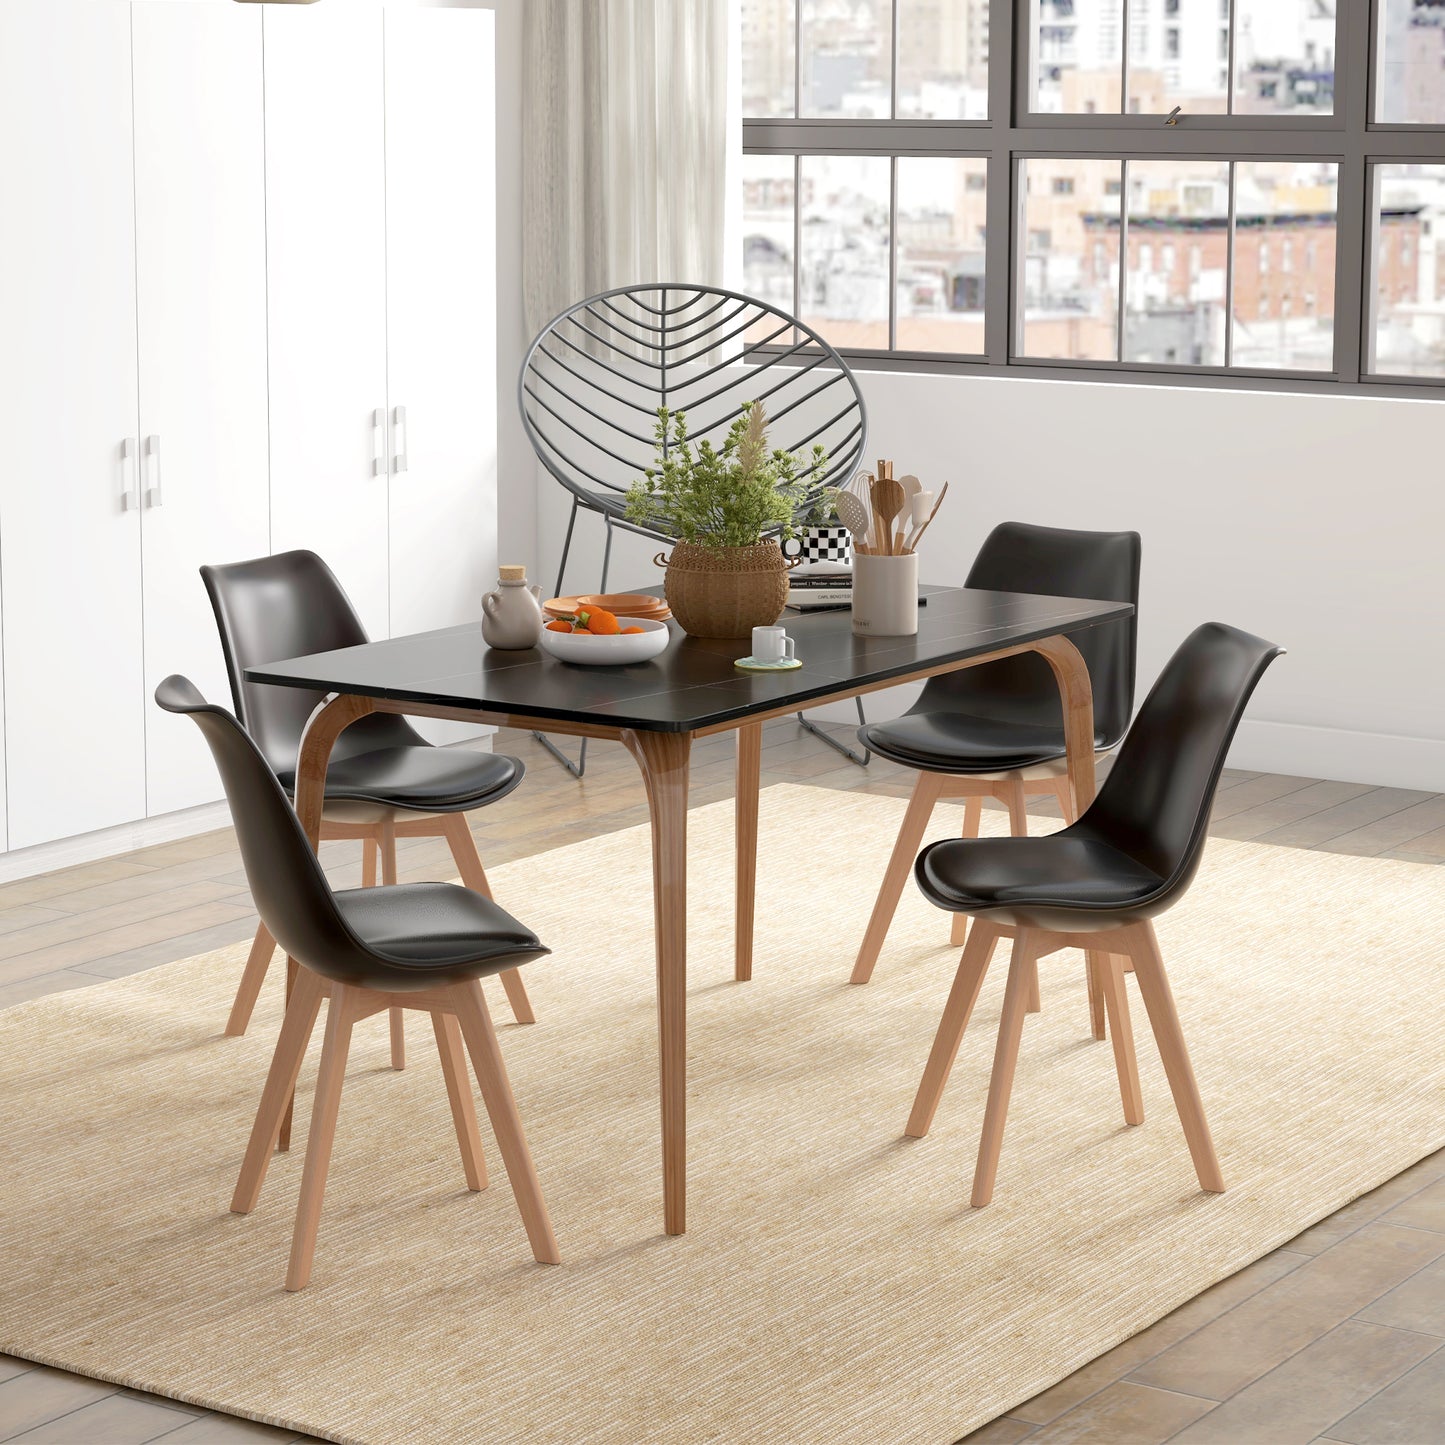 Modern Dining Table Chairs Set of 4, Rubber Wood Kitchen Table Chairs with PU Leather Cushion for Living Room, Bedroom - Gallery Canada